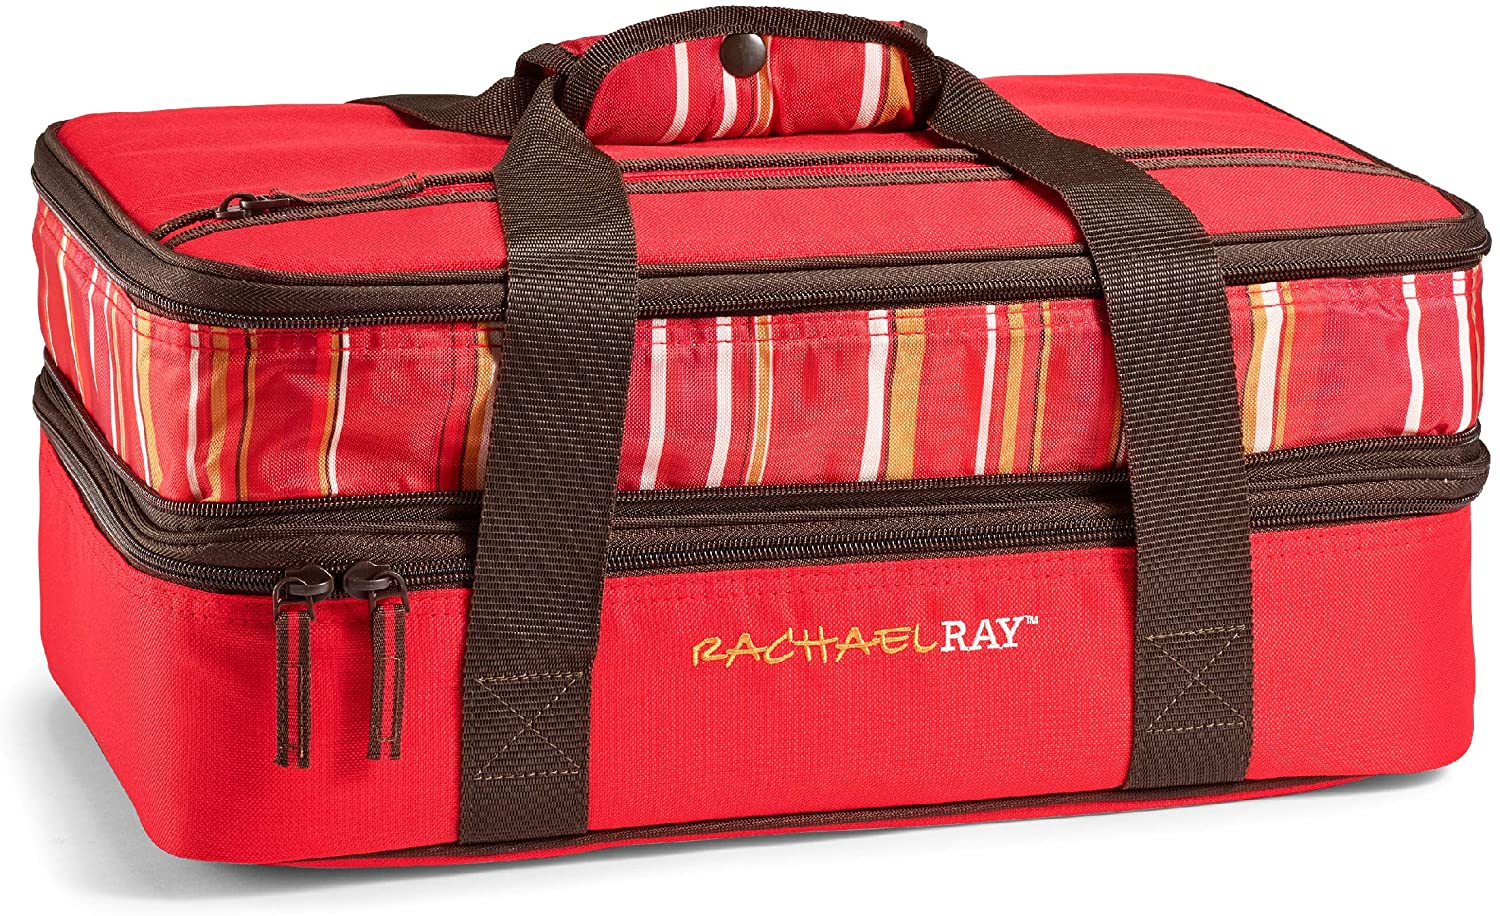 Rachael Ray Expandable Lasagna and Casserole Carrier